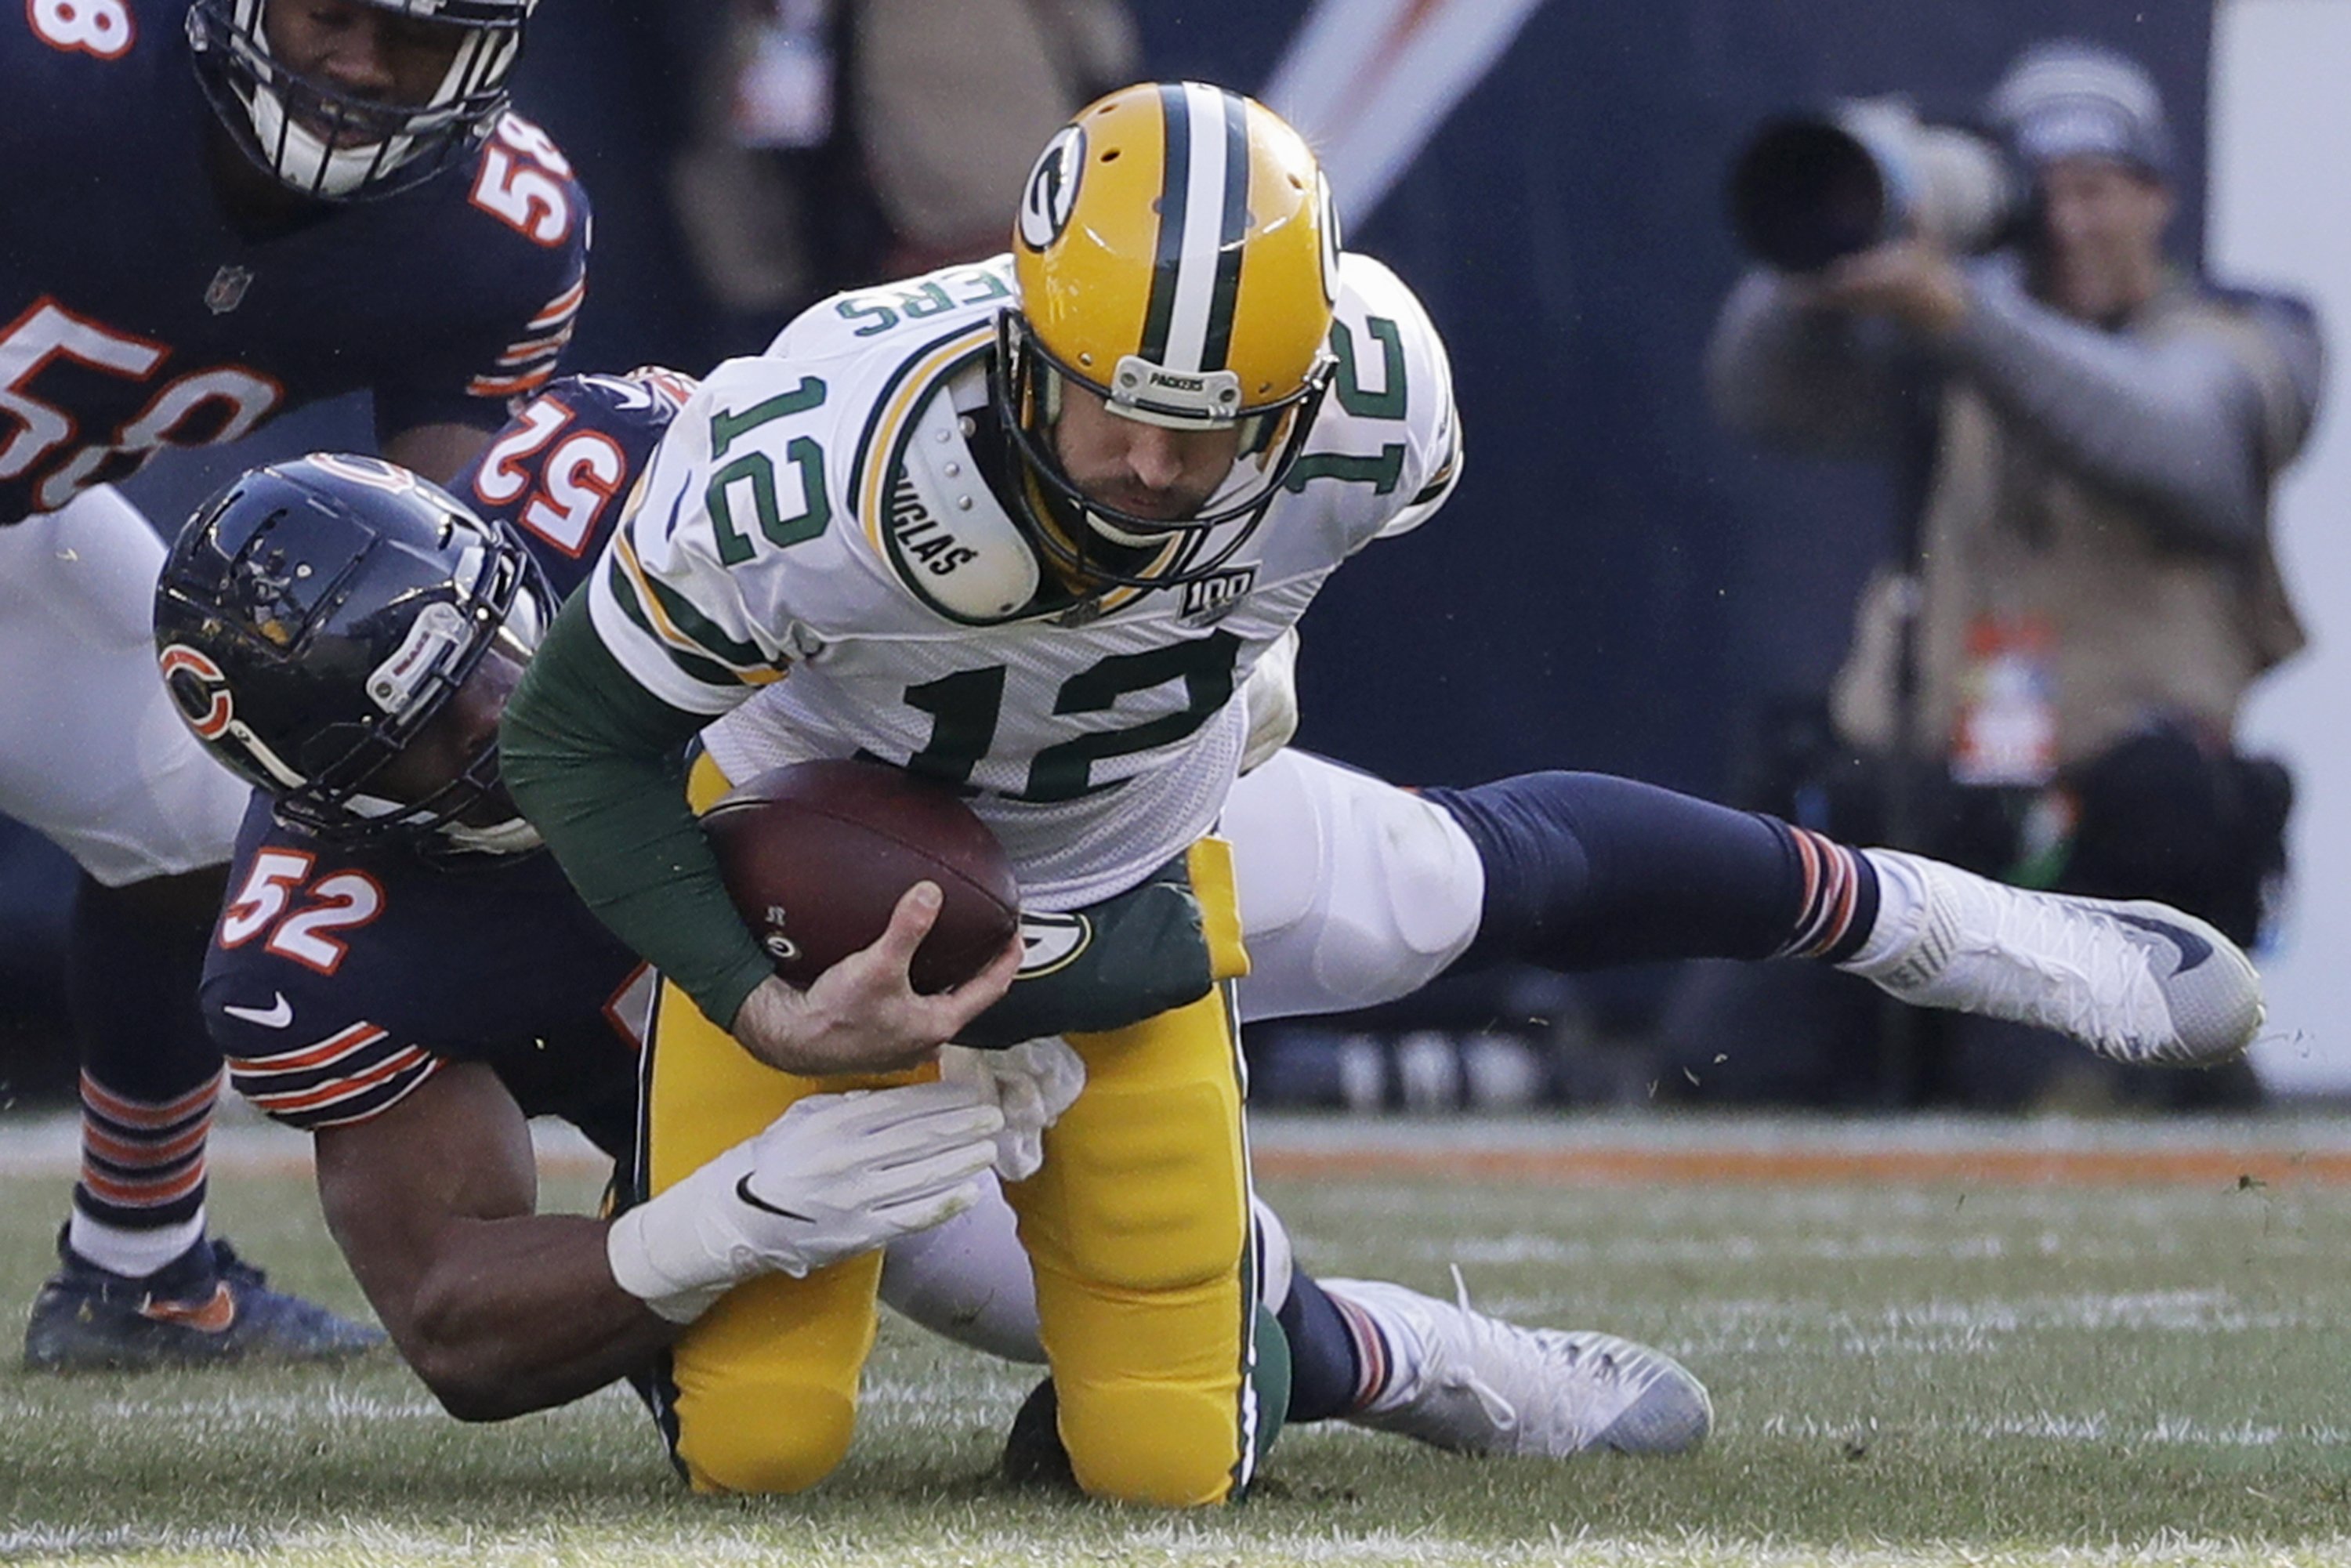 Packers and Bears reverse roles in NFL’s 100th season opener